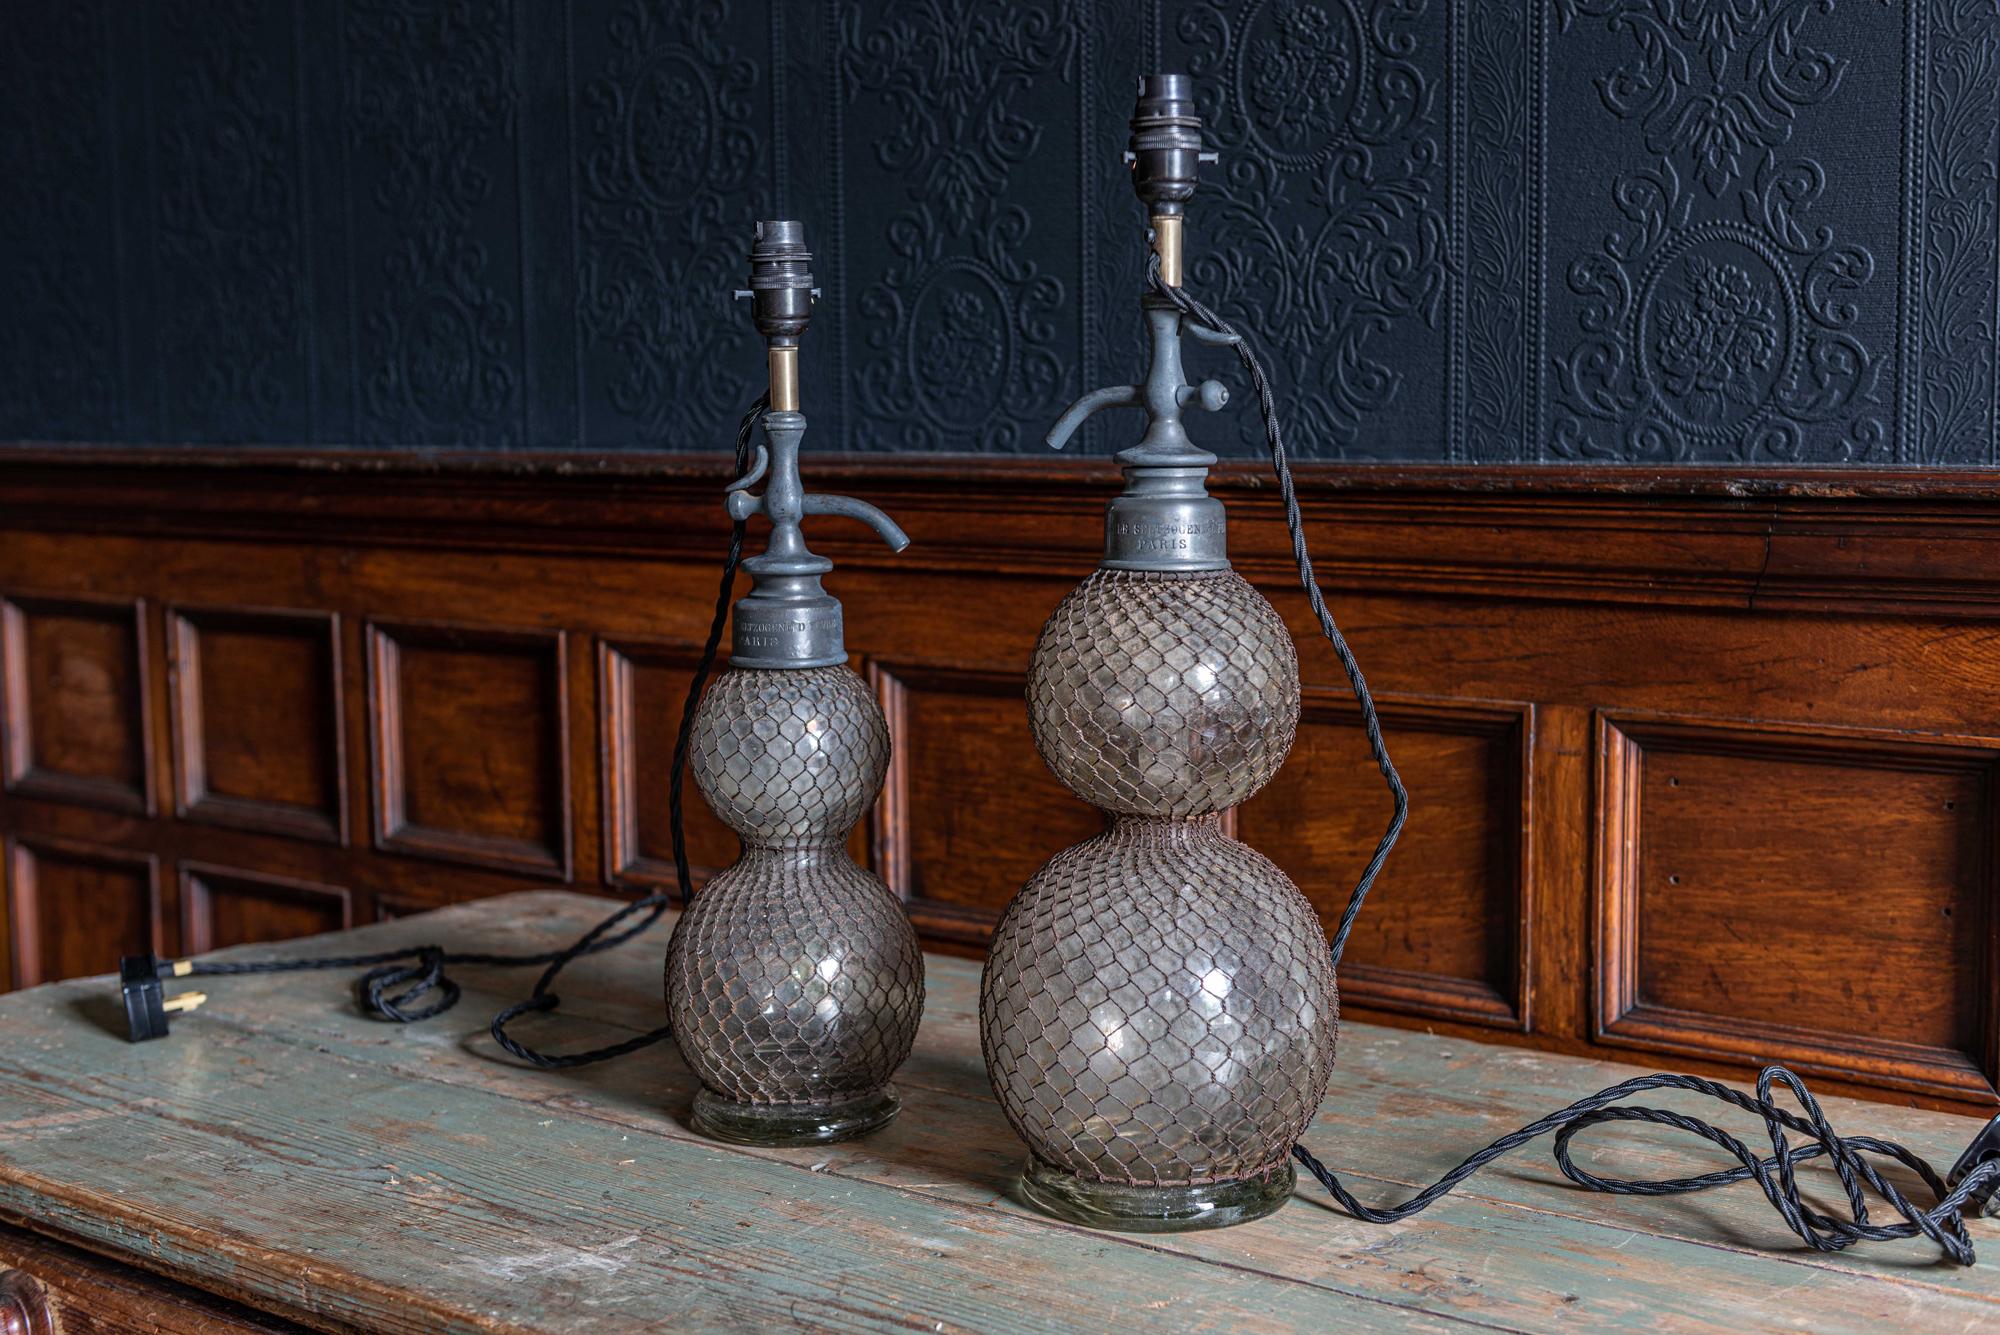 19th century French seltzer siphon lamps
Parisian hand blown glass 'double ball' seltzer or soda siphons covered in decorative wired jackets. Paris makers name engraved on the pewter neck, sourced from Paris.

The large lamp has two large cracks but